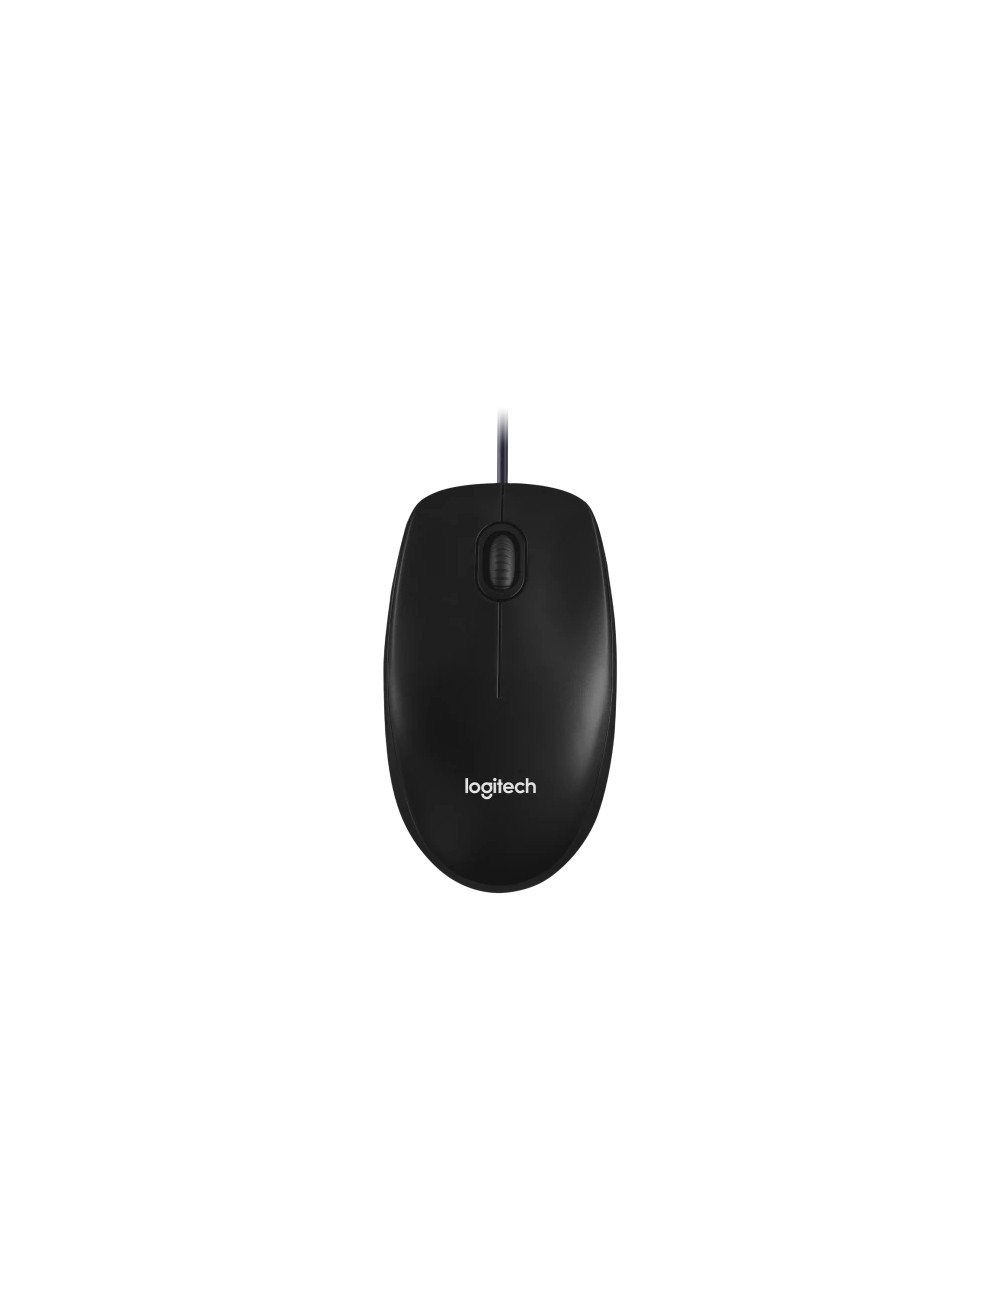 Logitech Mouse M100 Optical, Black, Wired